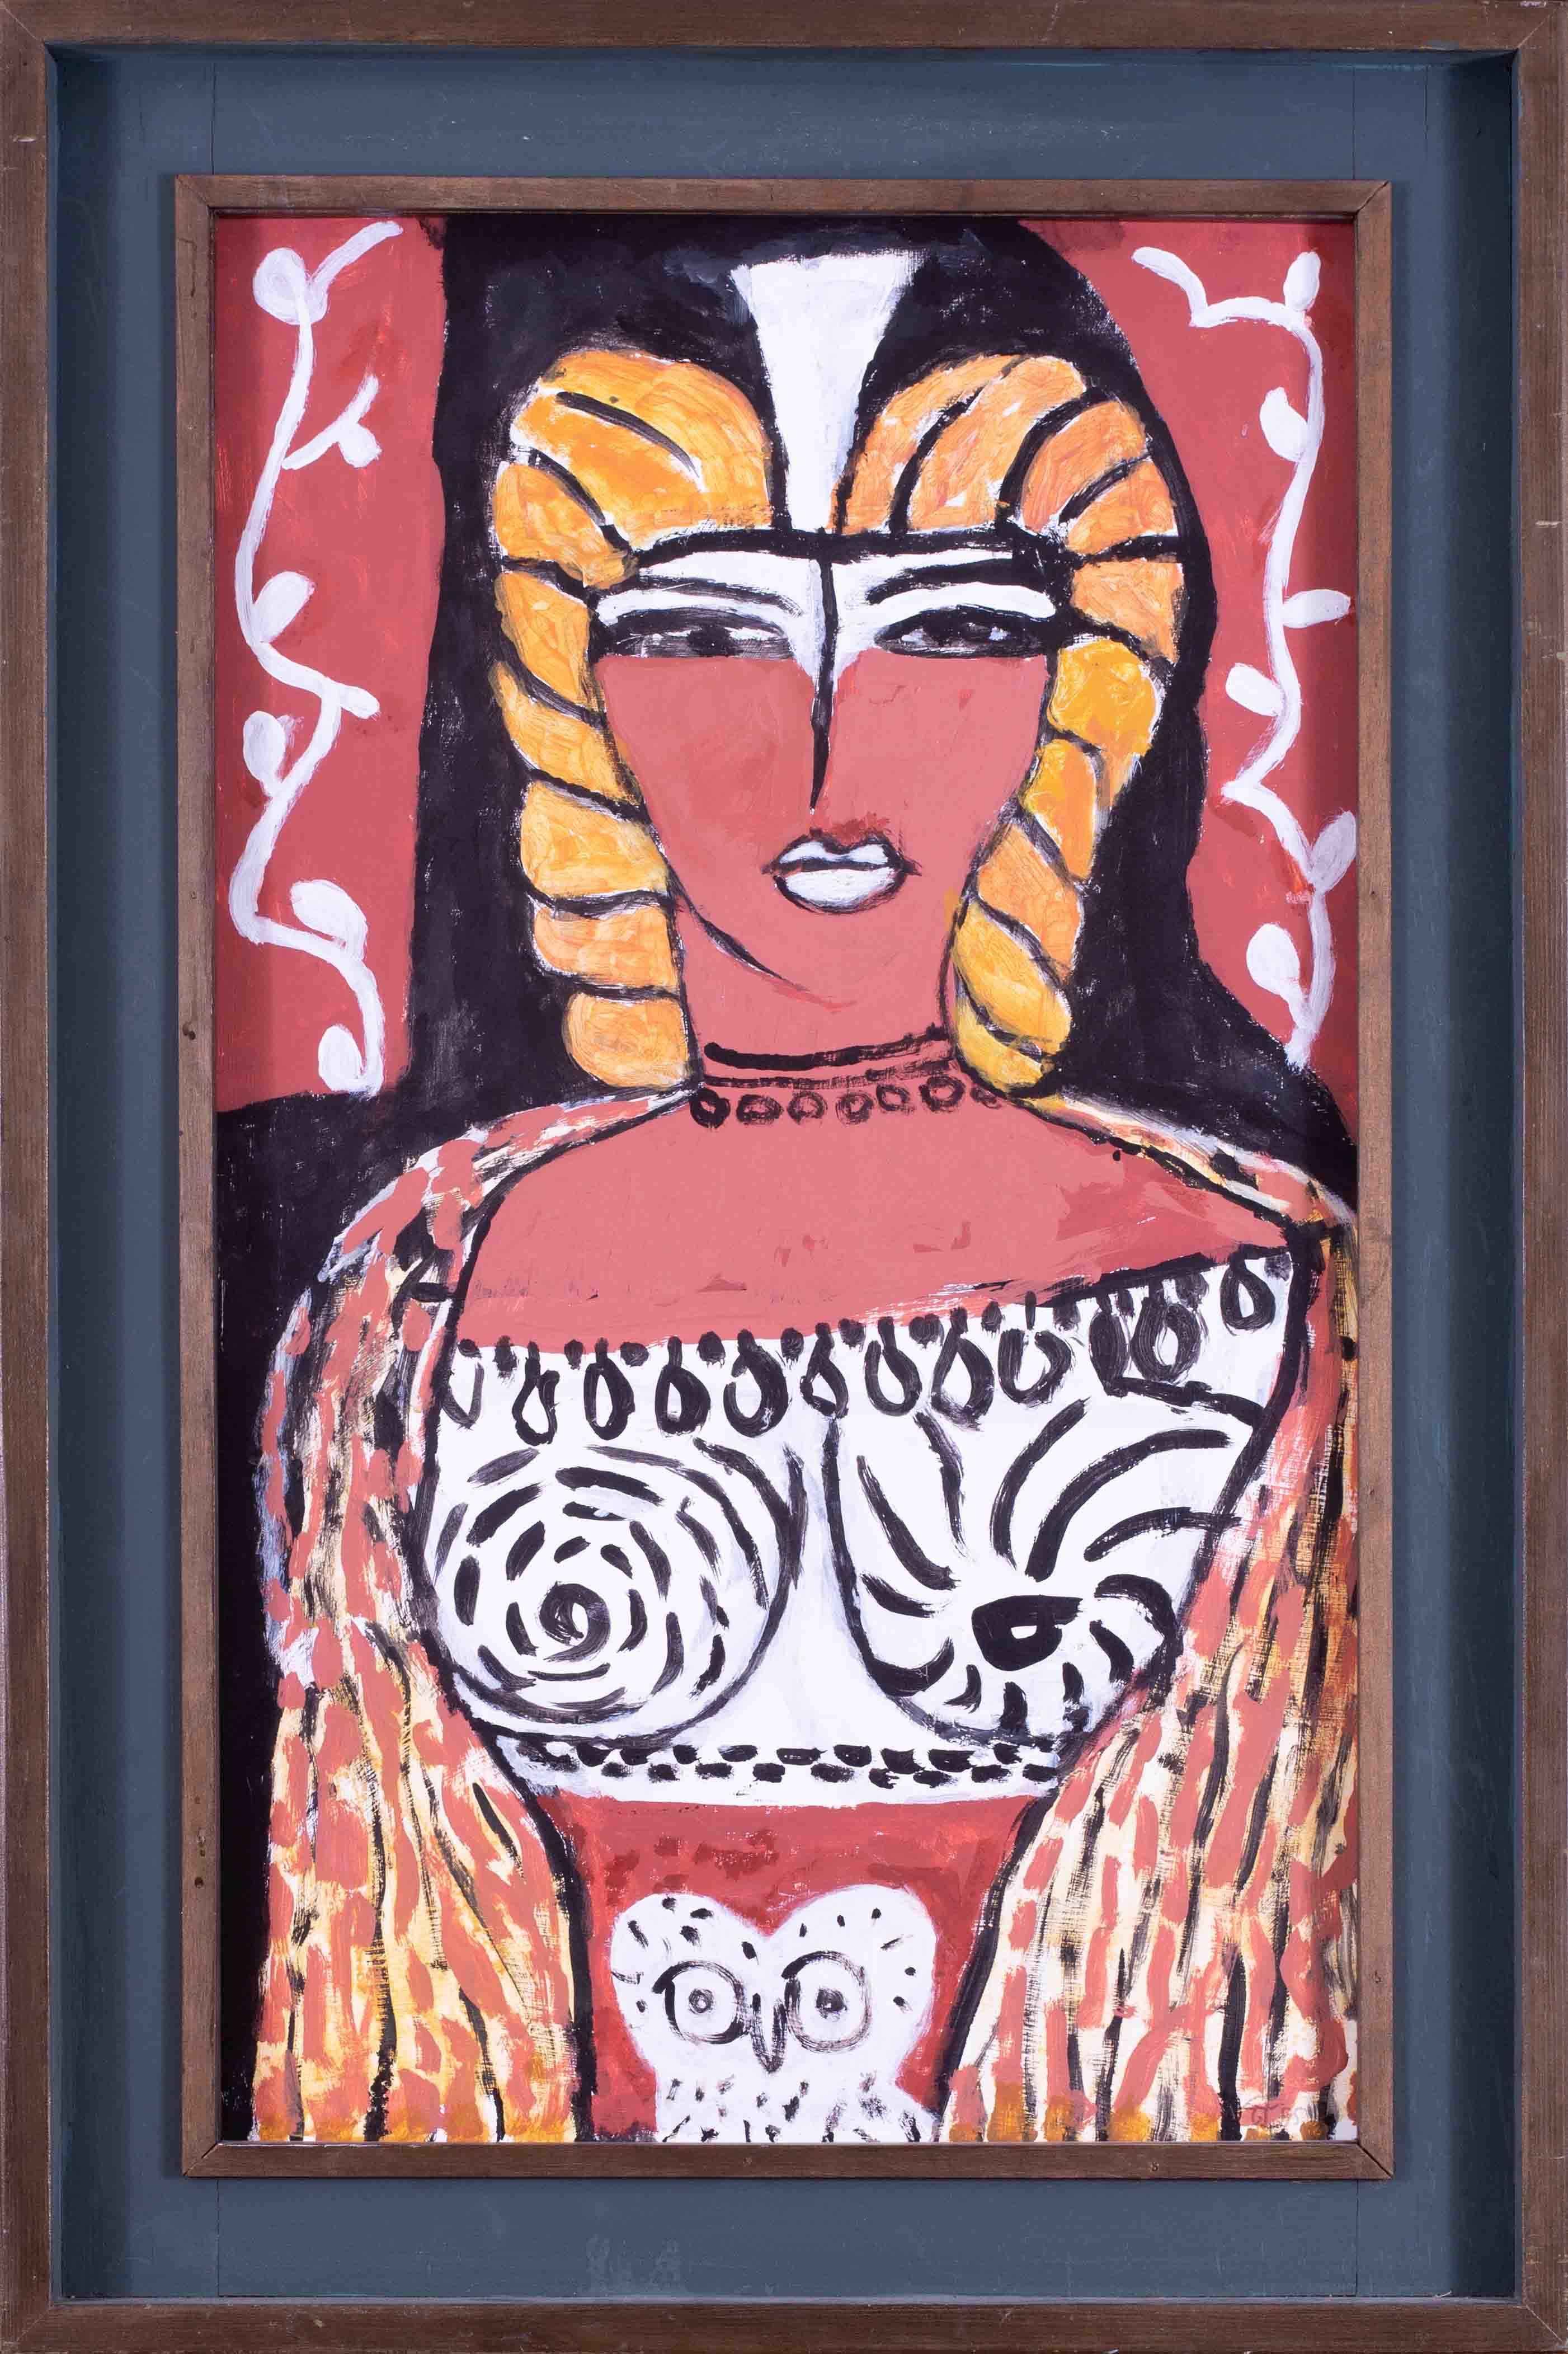 A bold and striking portrait of 'Athene' by the notable Modern British artist Ewart Johns.  This painting is characterised by strong red / brown colours, highlighted by whites and blacks, confident brushwork, and a fusion of abstract and figurative